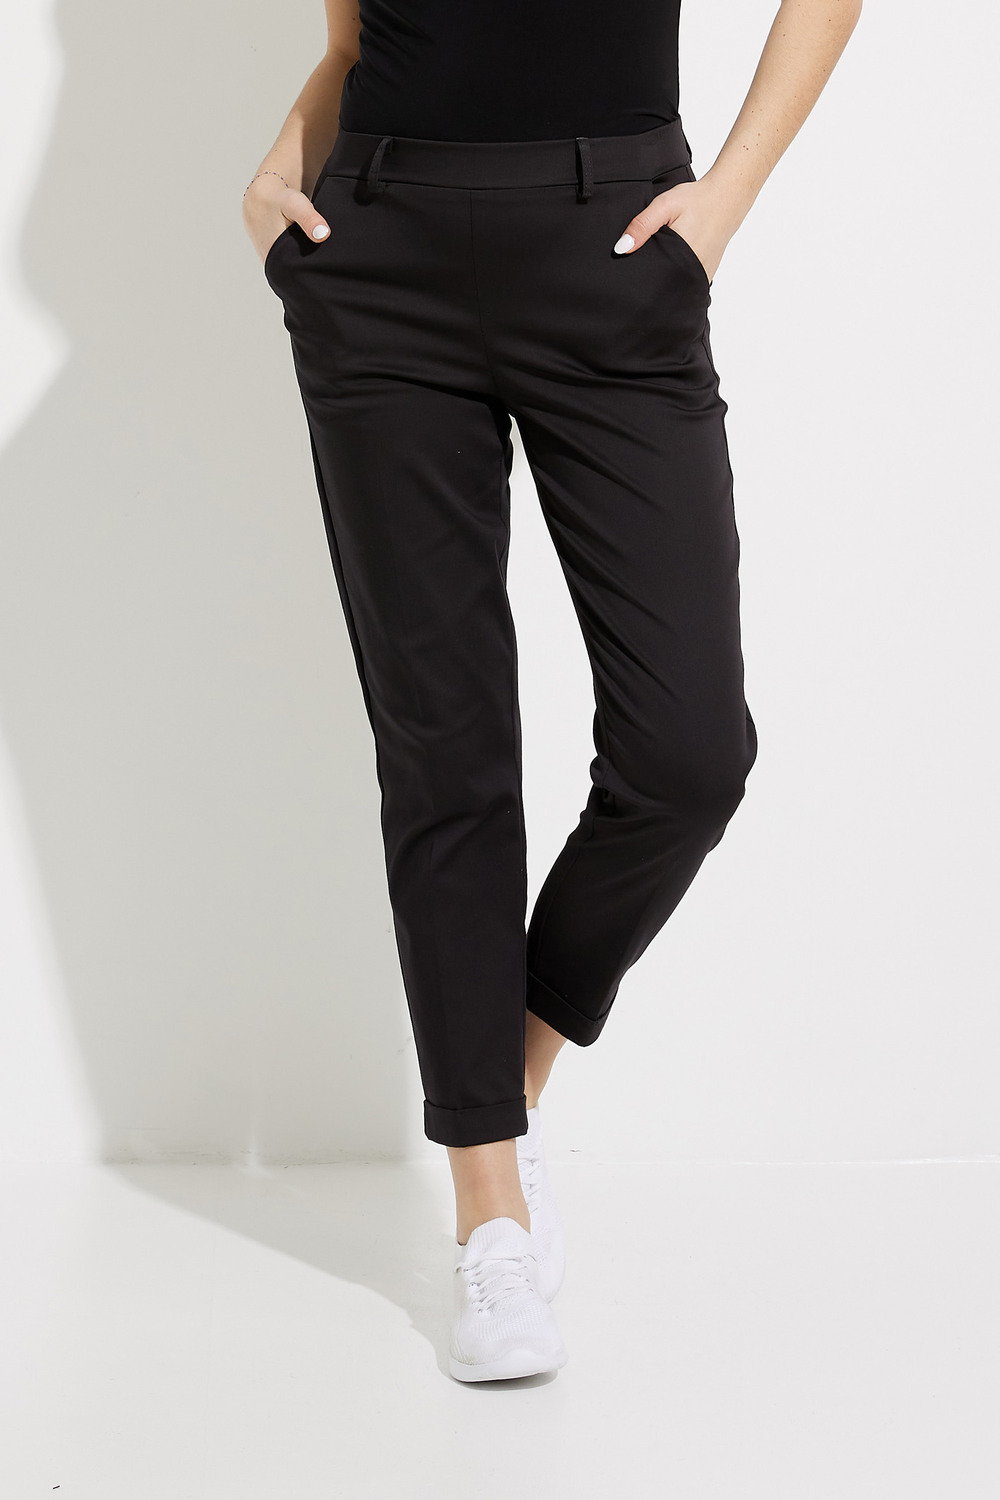 Cuffed Ankle Pants Style 232156. Black